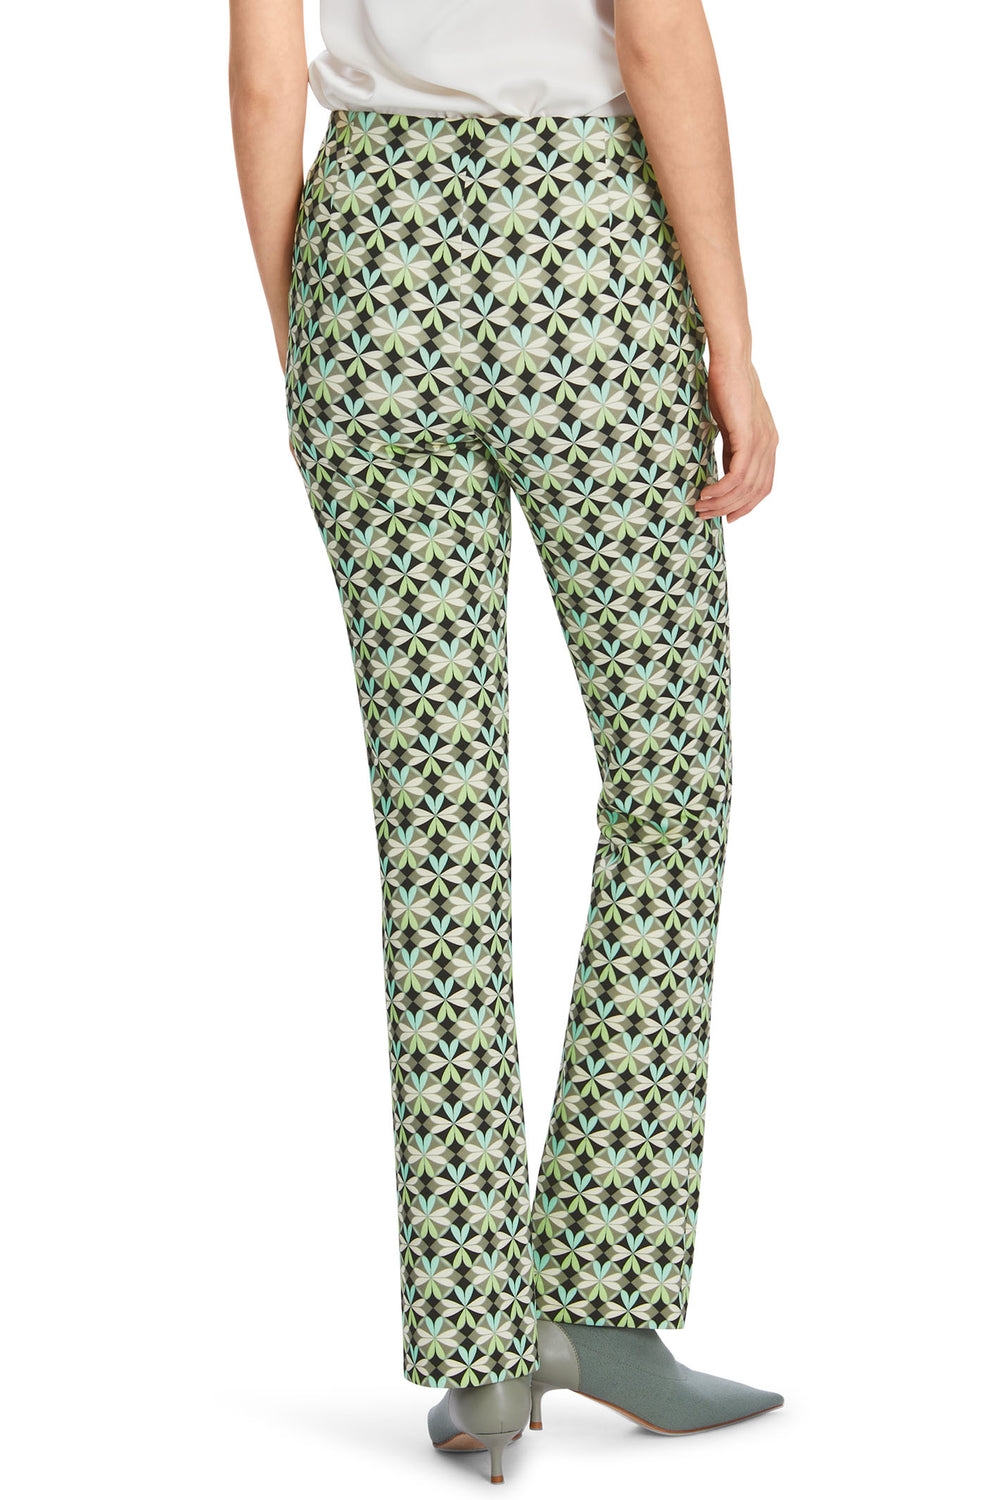 Marc Cain Collection XC 81.28 J08 Soft Malachite Green Print Pull-On Trousers - Olivia Grace Fashion